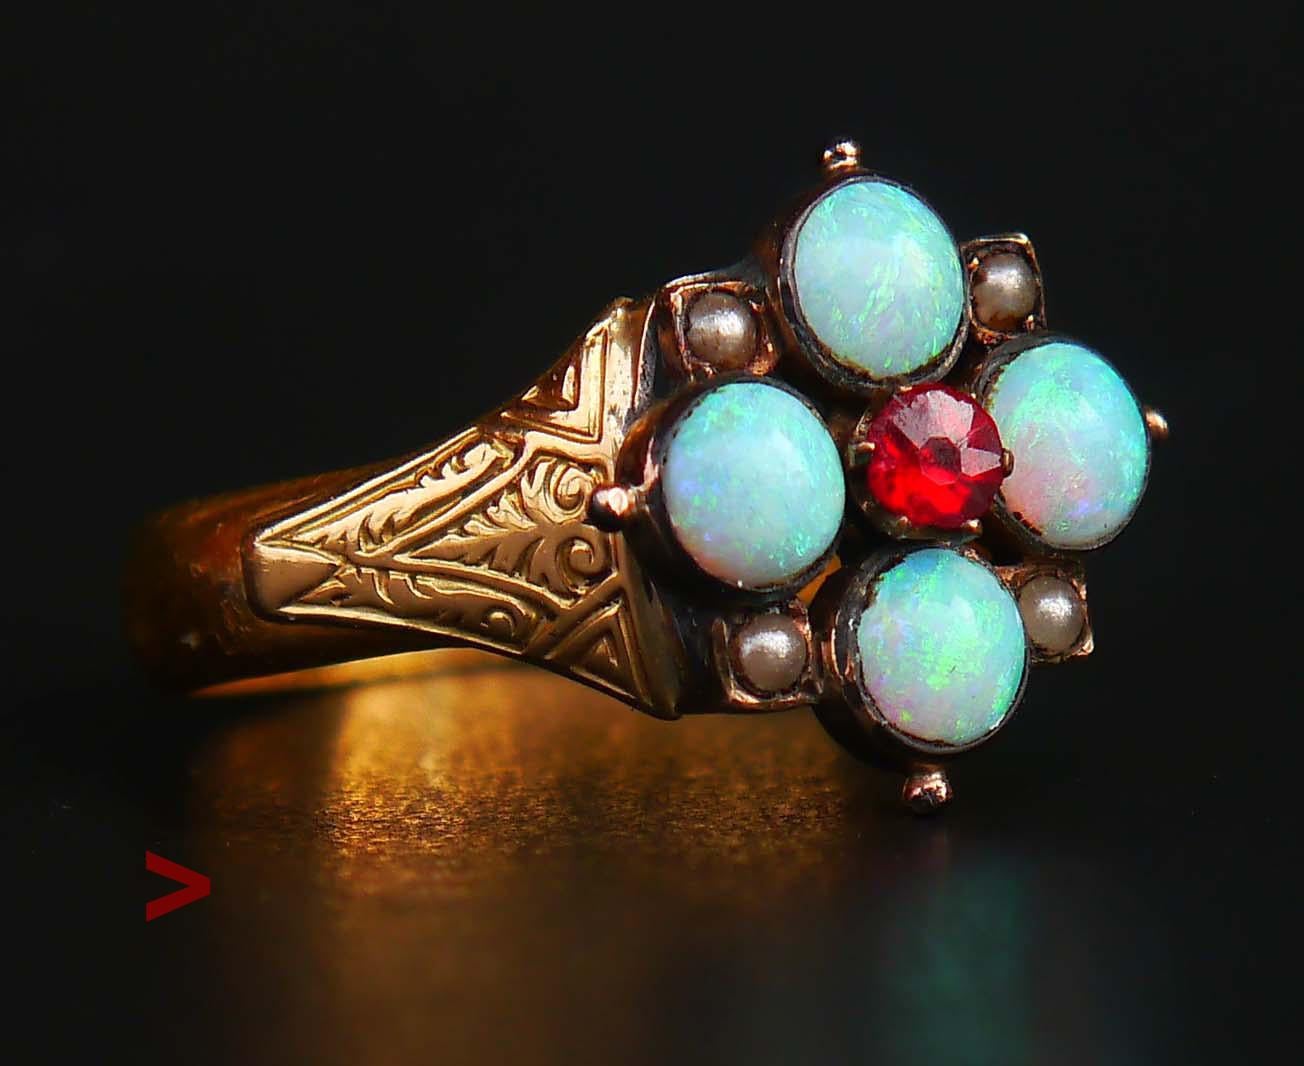 155 years old  Flower Ring in excellent condition.

Four bezel set natural Opal  settings Ø 4.25 mm/ 0.28ct each + one old diamond cut / claw set rosy Red Garnet setting Ø 4mm/0.25ct + four tiny Seed Pearls. Opals are colorful and bright and give